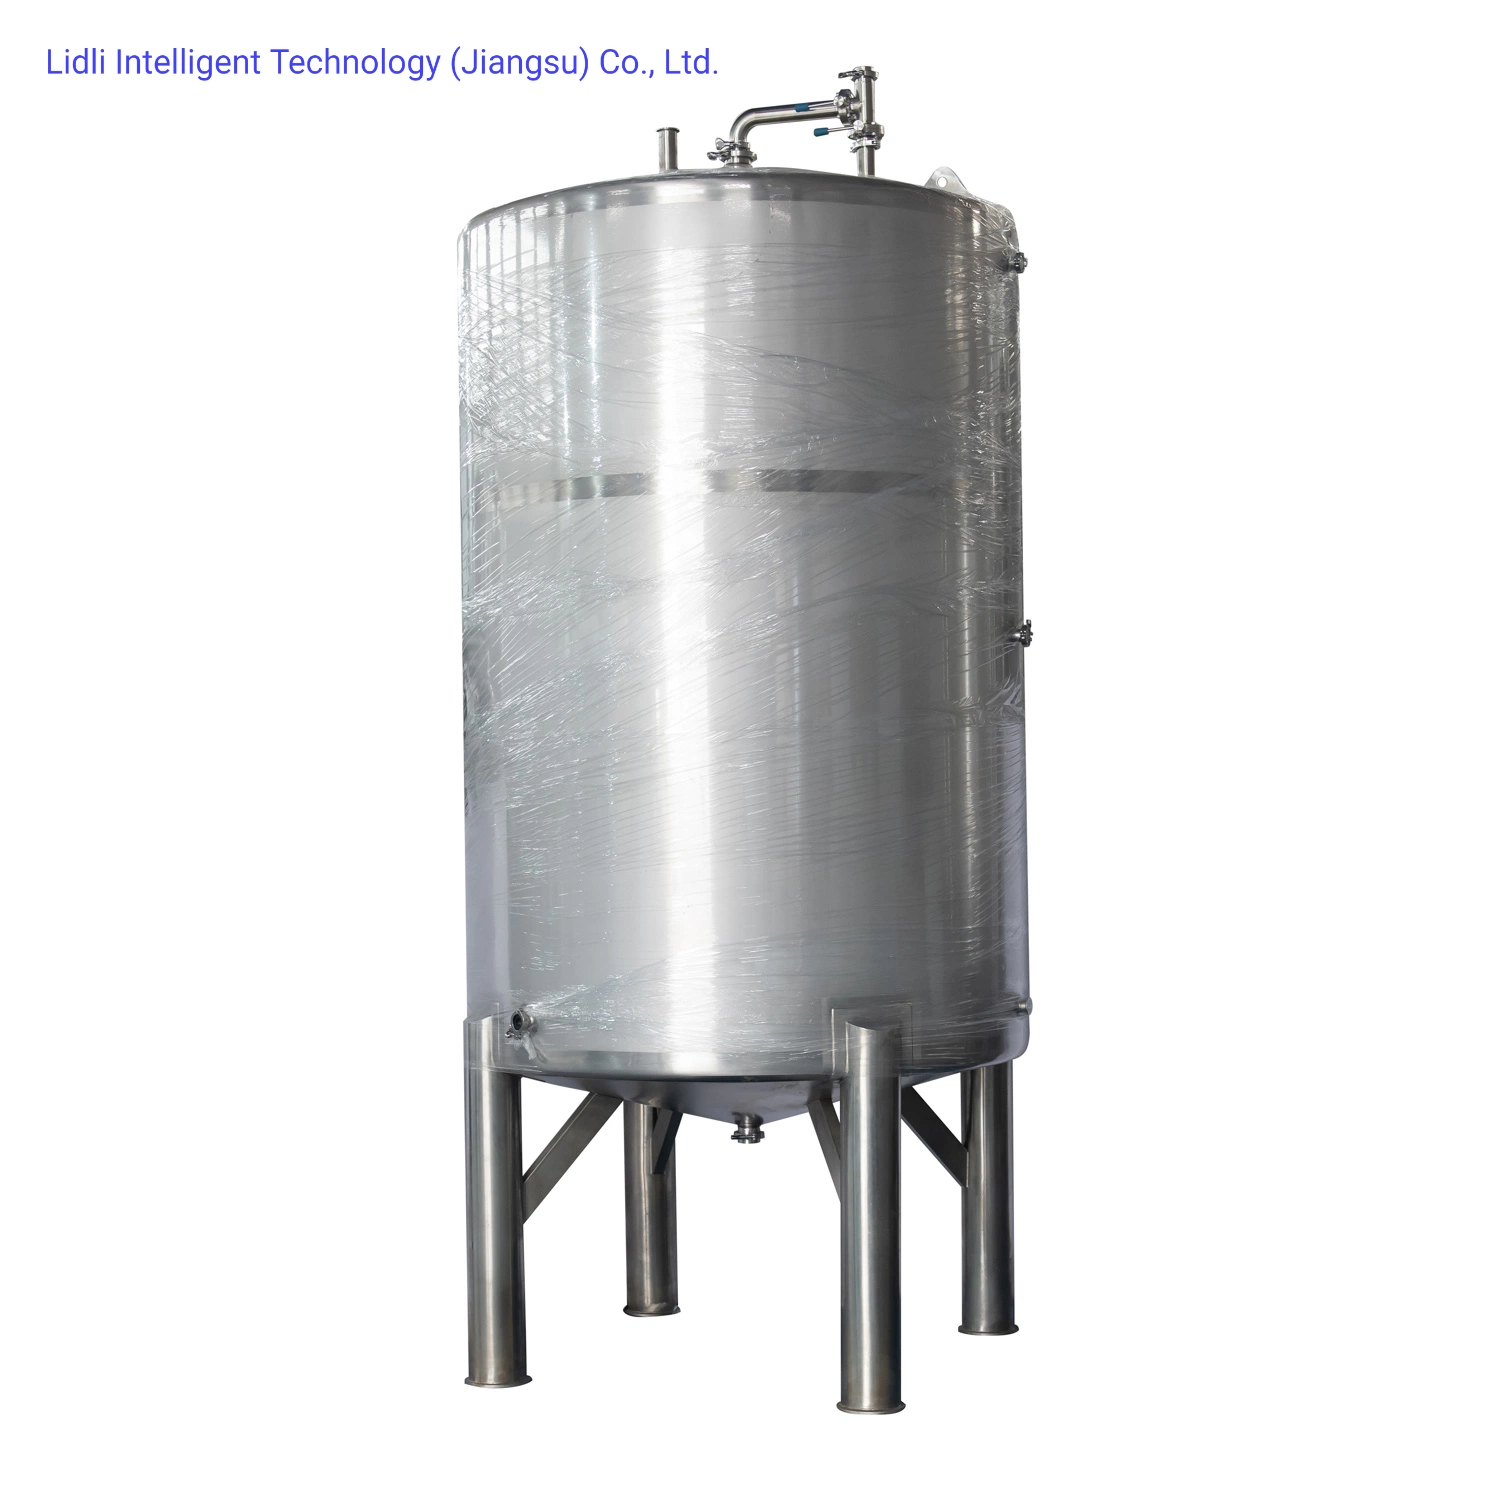 RO Purified Drinking Water Production Plant / Water Treatment Equipment